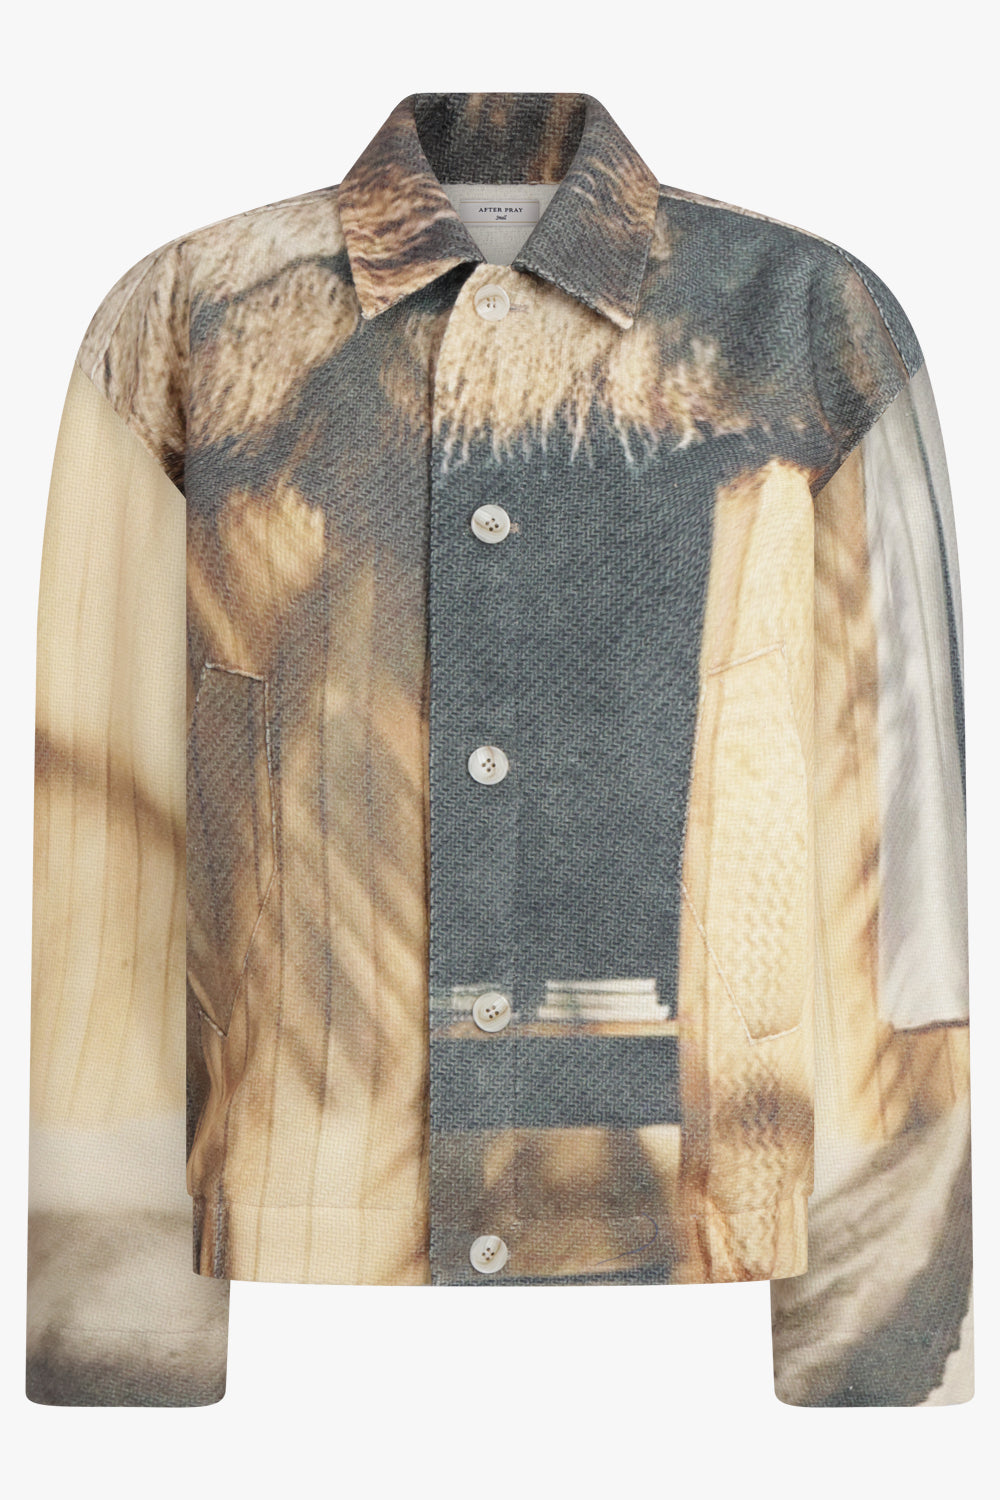 AFTER PRAY Unclassified FULL PRINTED JACKET CABIN | BEIGE